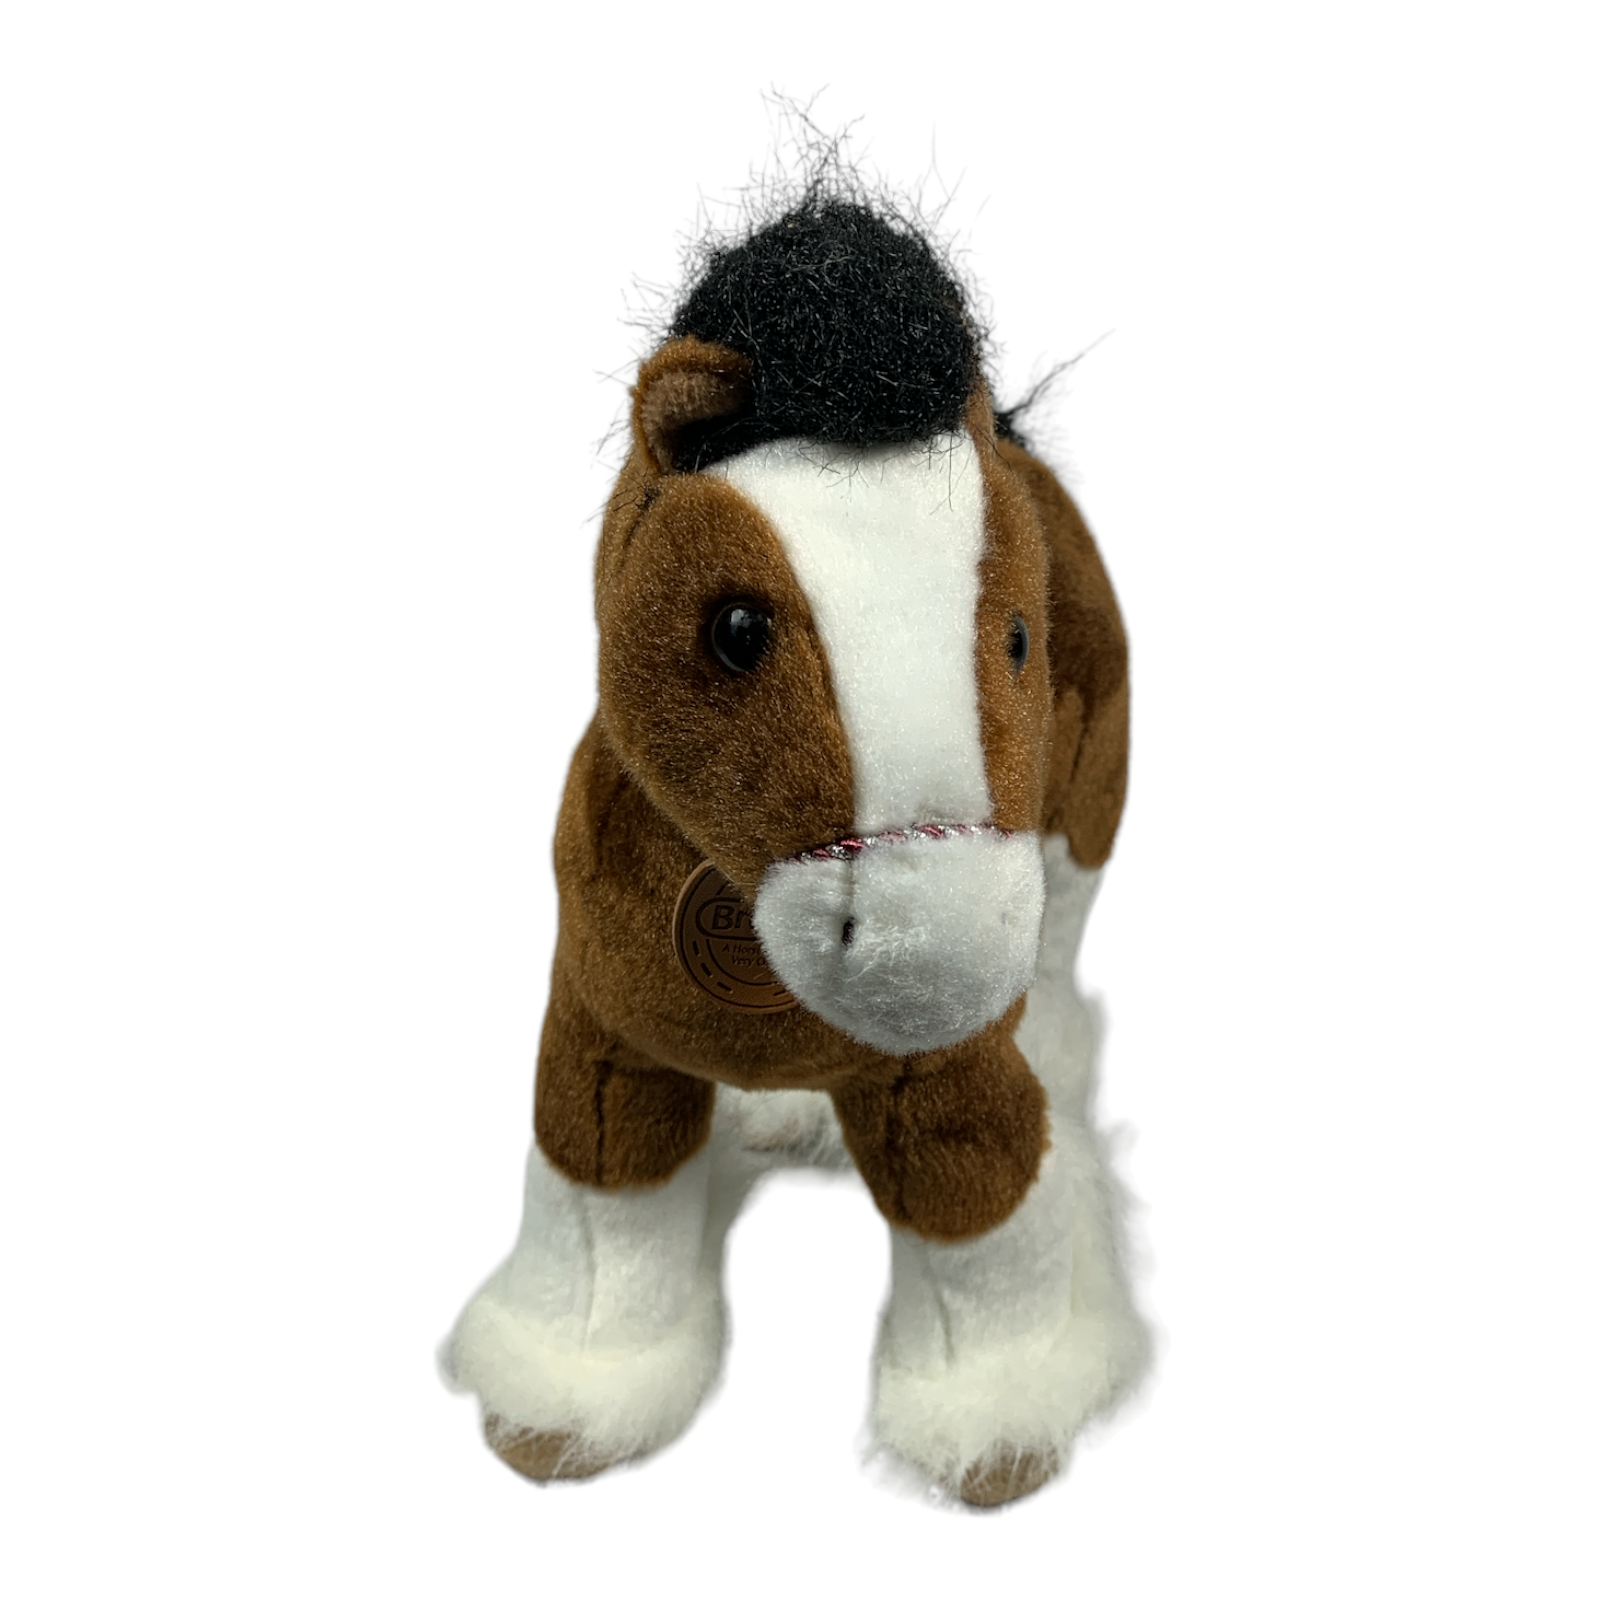 Primary image for 12” Breyer Pony Plush A Horse of My Very Own Brown & White